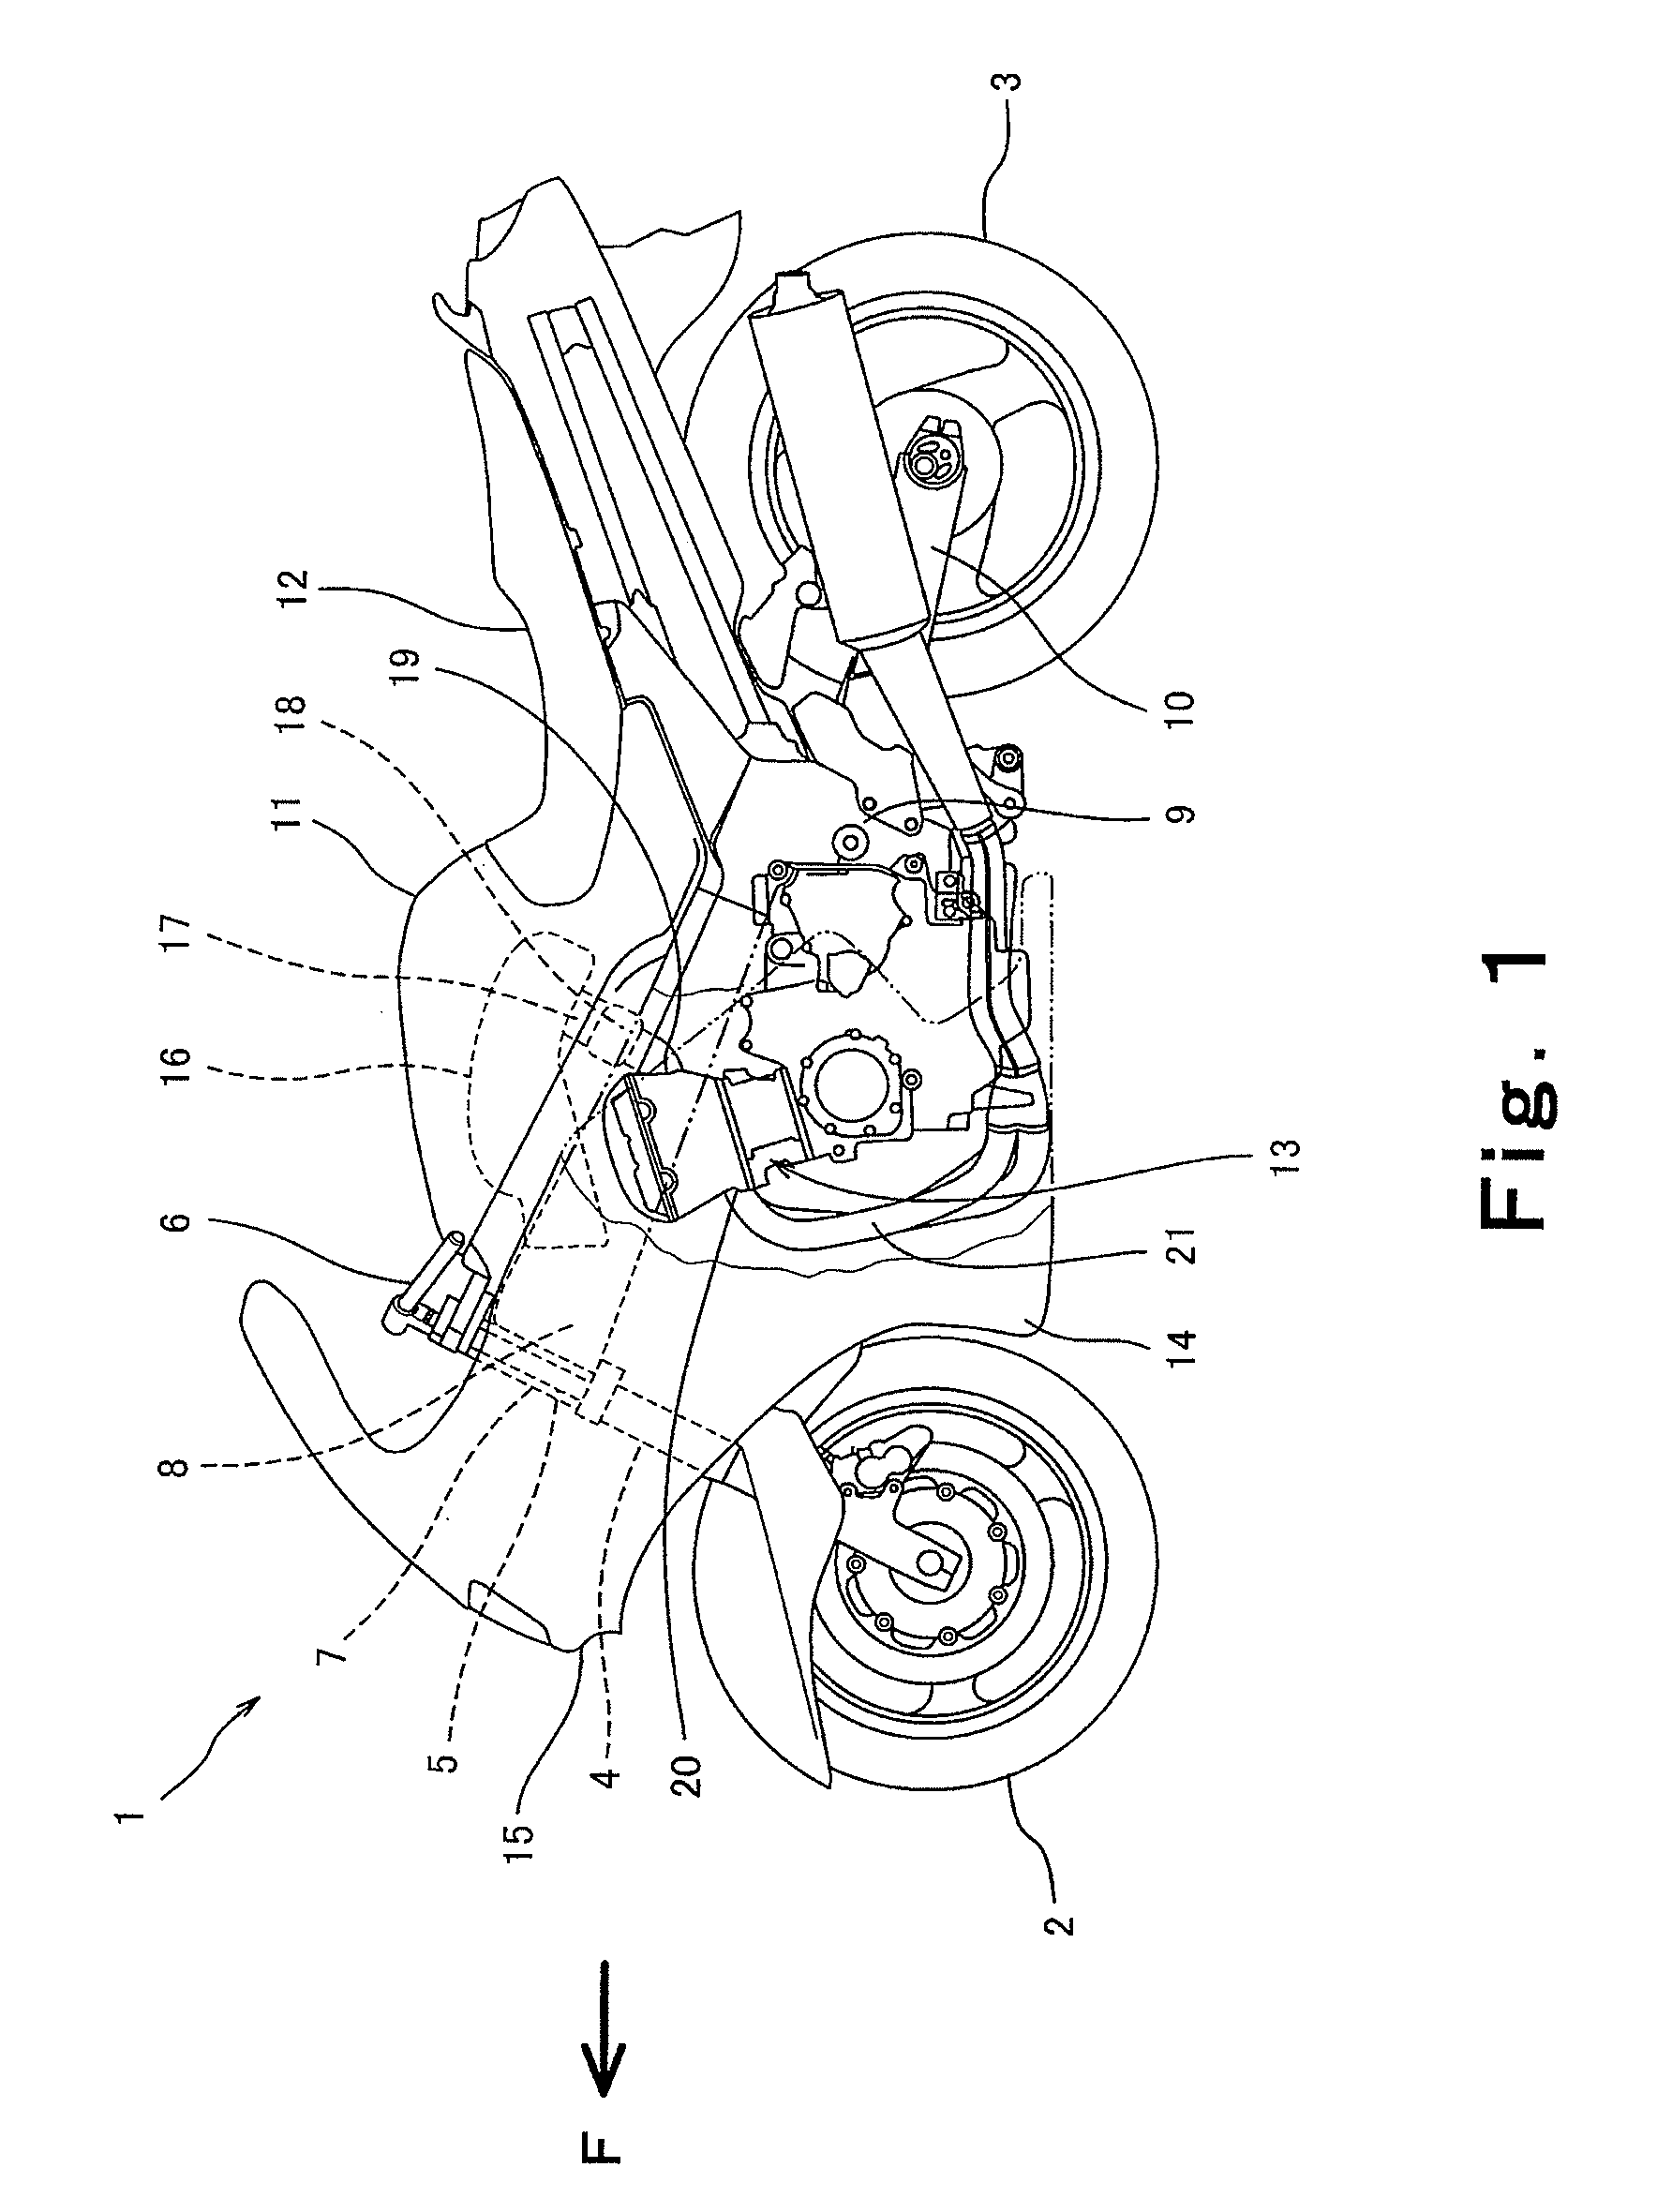 Air-intake duct and air-intake structure